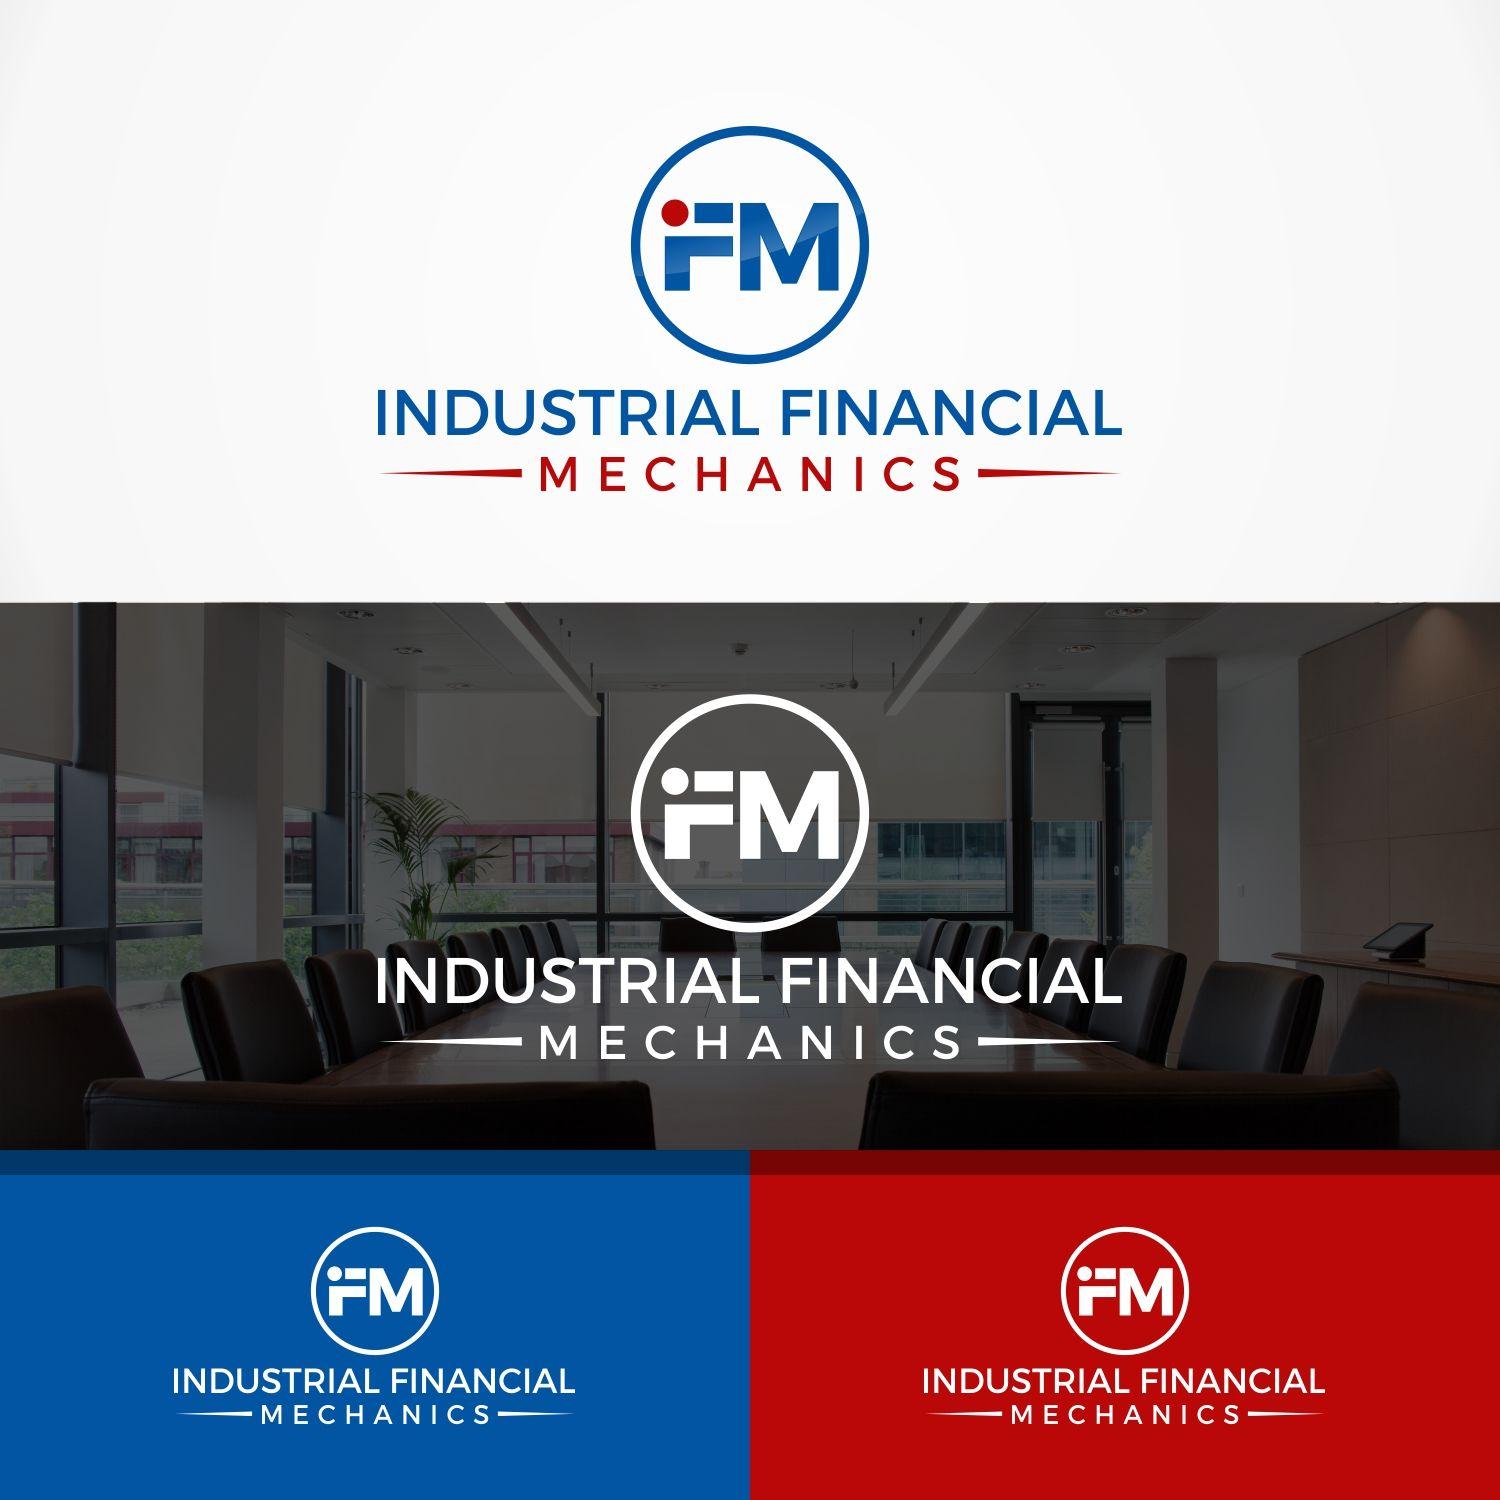 Industrial Mechanic Logo - Professional, Serious, Education Logo Design for IFM